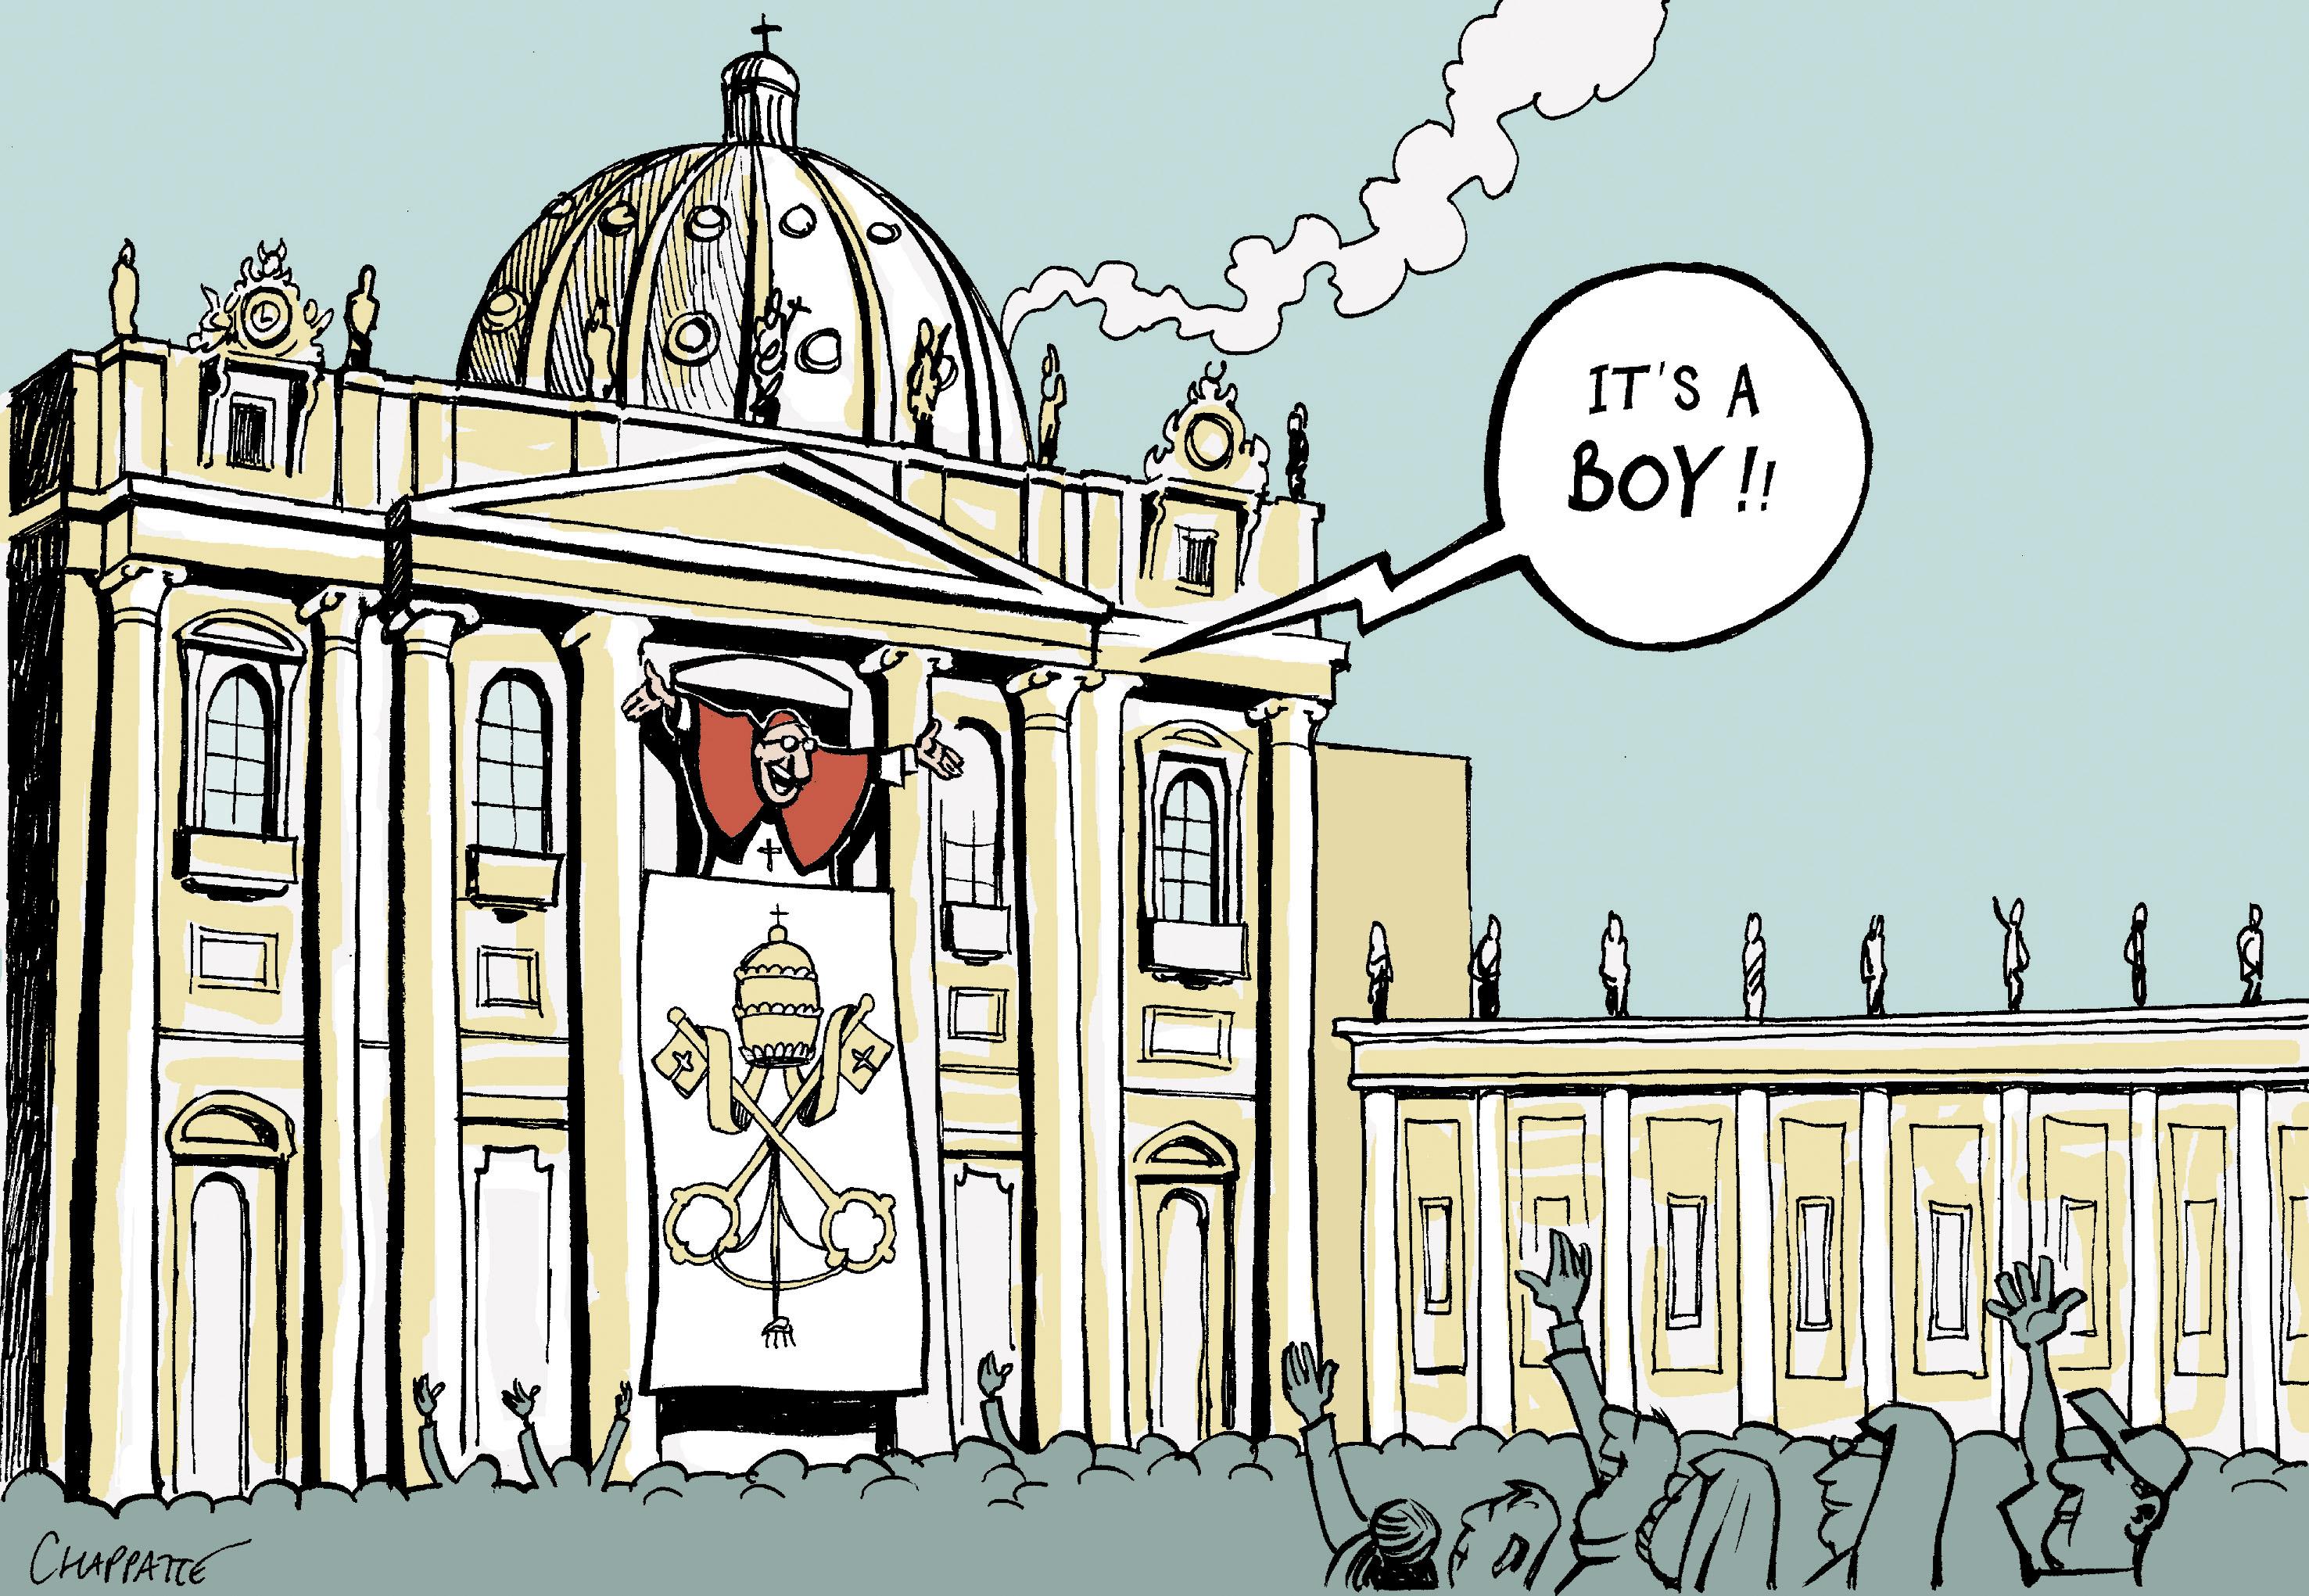 Election of a new pope